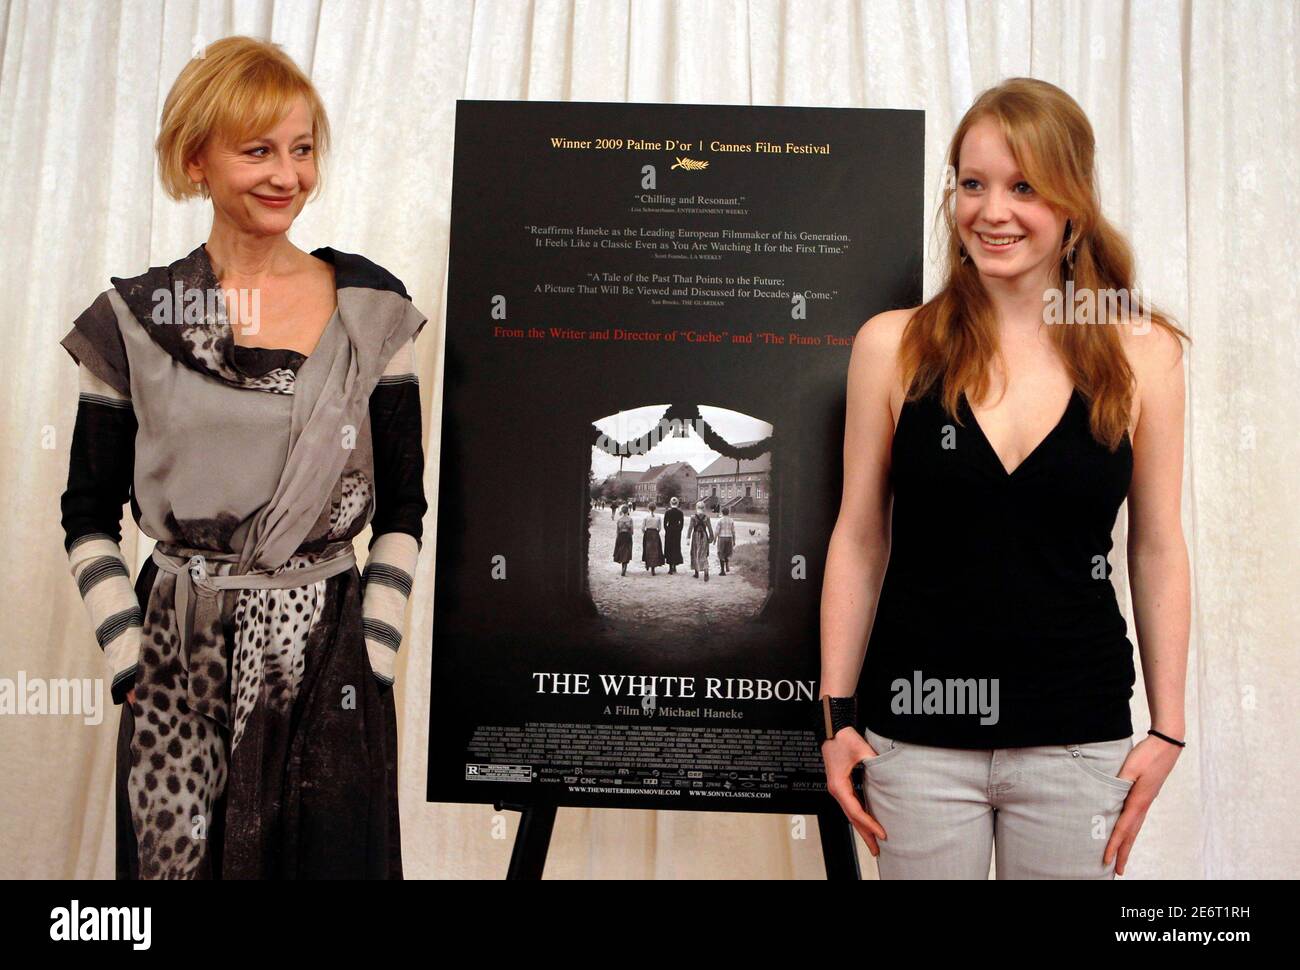 Actresses Susanne Lothar (L) and Leonie Benesch, from the German film 'The White Ribbon (Das Weisse Band)', nominated for a best foreign language film award, poses for photographers ahead of the 82nd Academy Awards in Hollywood, March 5, 2010.  REUTERS/Brian Snyder  (UNITED STATES - Tags: ENTERTAINMENT) Stock Photo